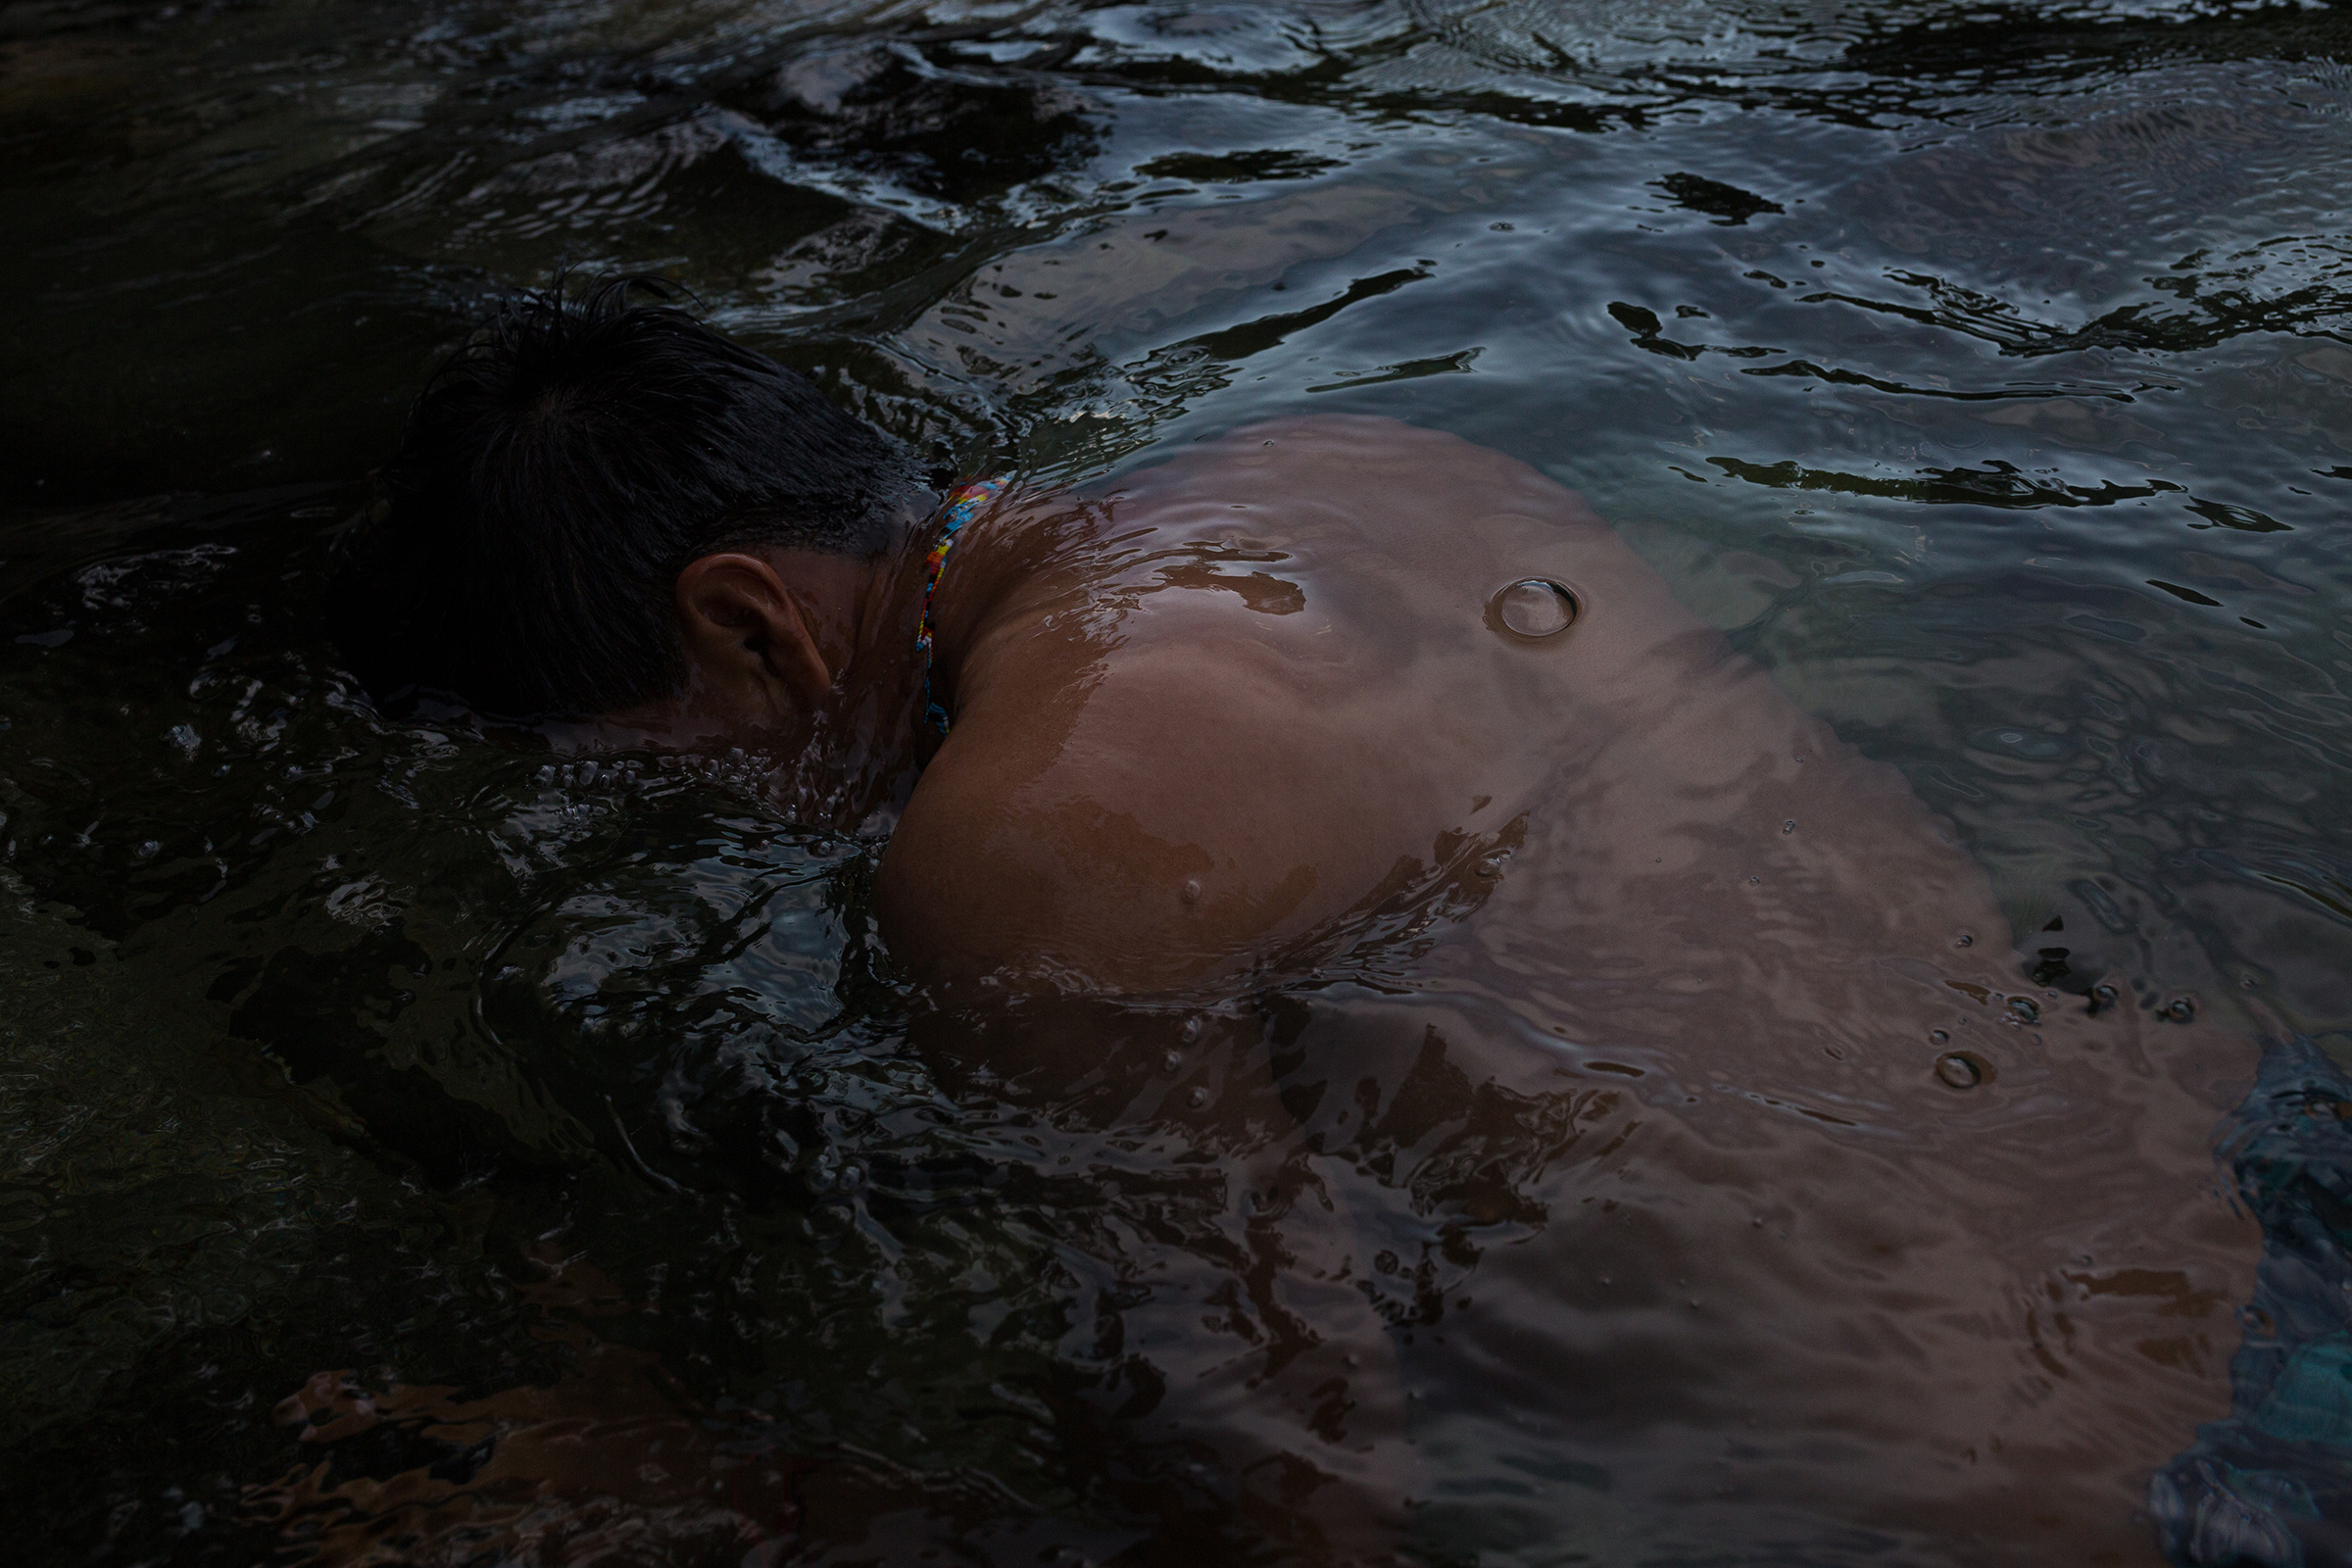 Alexis Grefa, a Kichwa Indigenous activist, takes a dip in the <a href="https://time.com/6224546/fight-to-save-ecuador-piatua-river/">Piatúa River</a>, which he seeks to protect, on April 26. (Andrés Yépez for TIME)